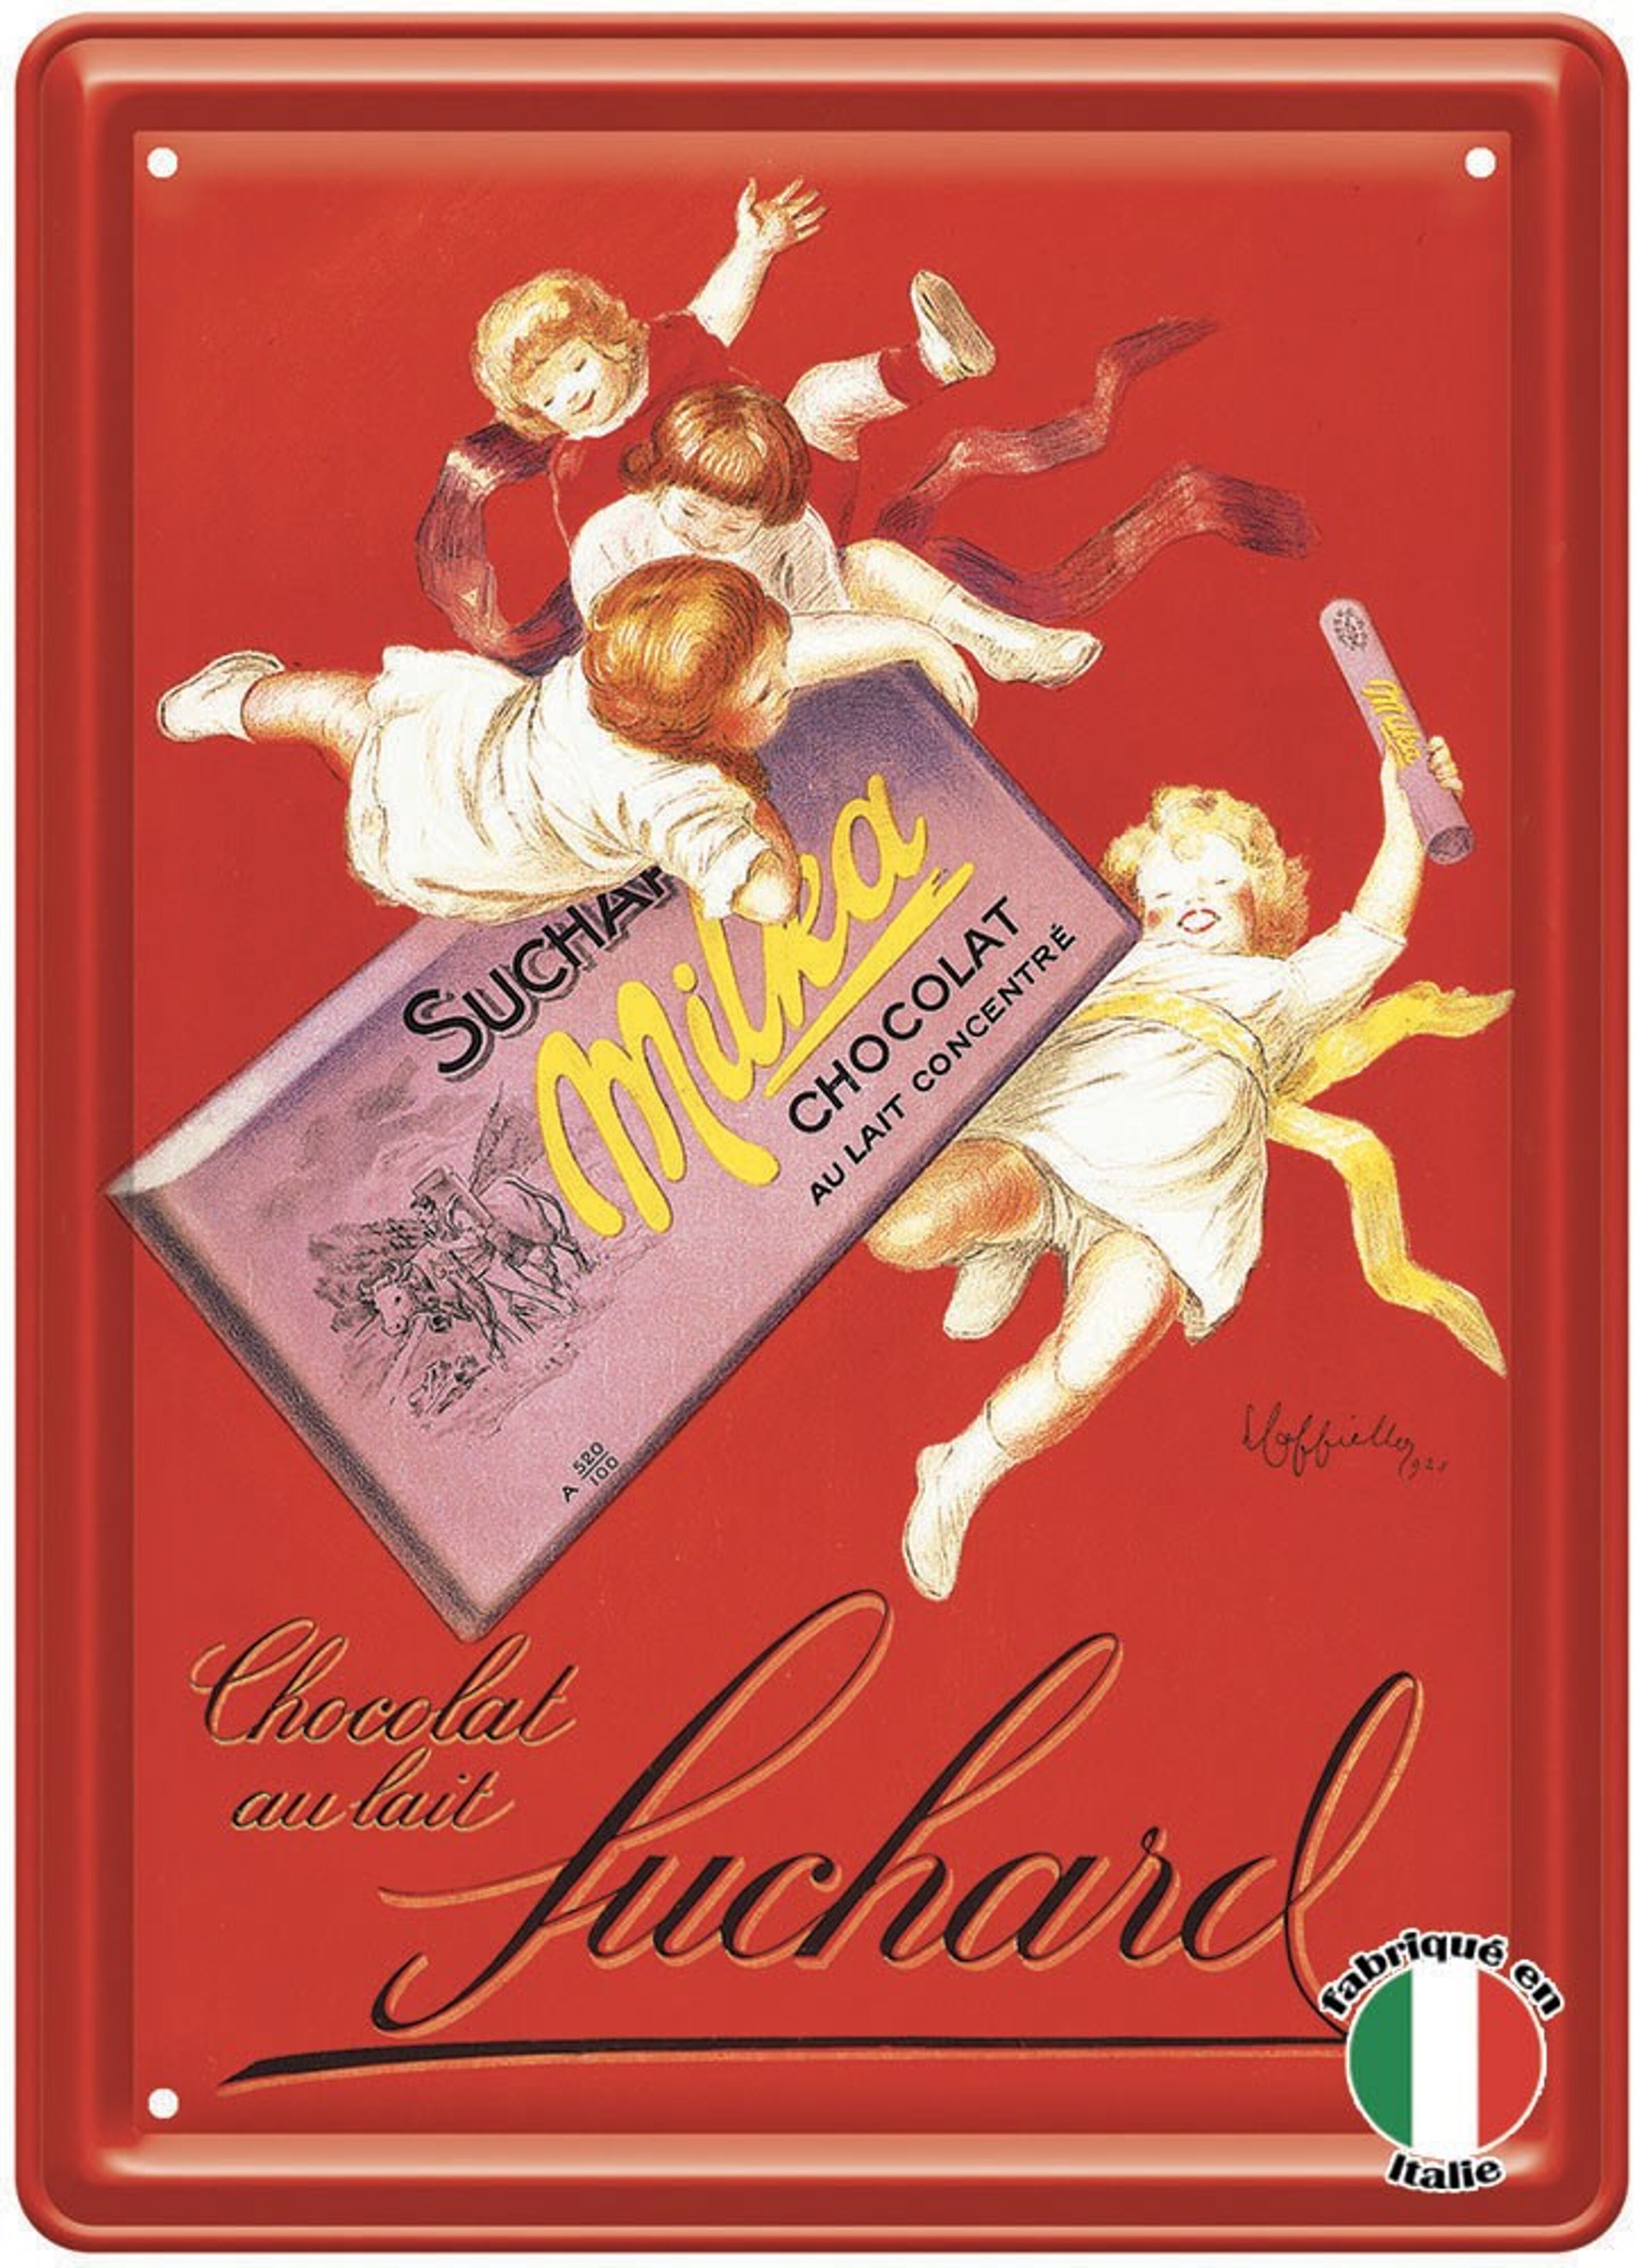 Suchard print by Vintage Advertising Collection